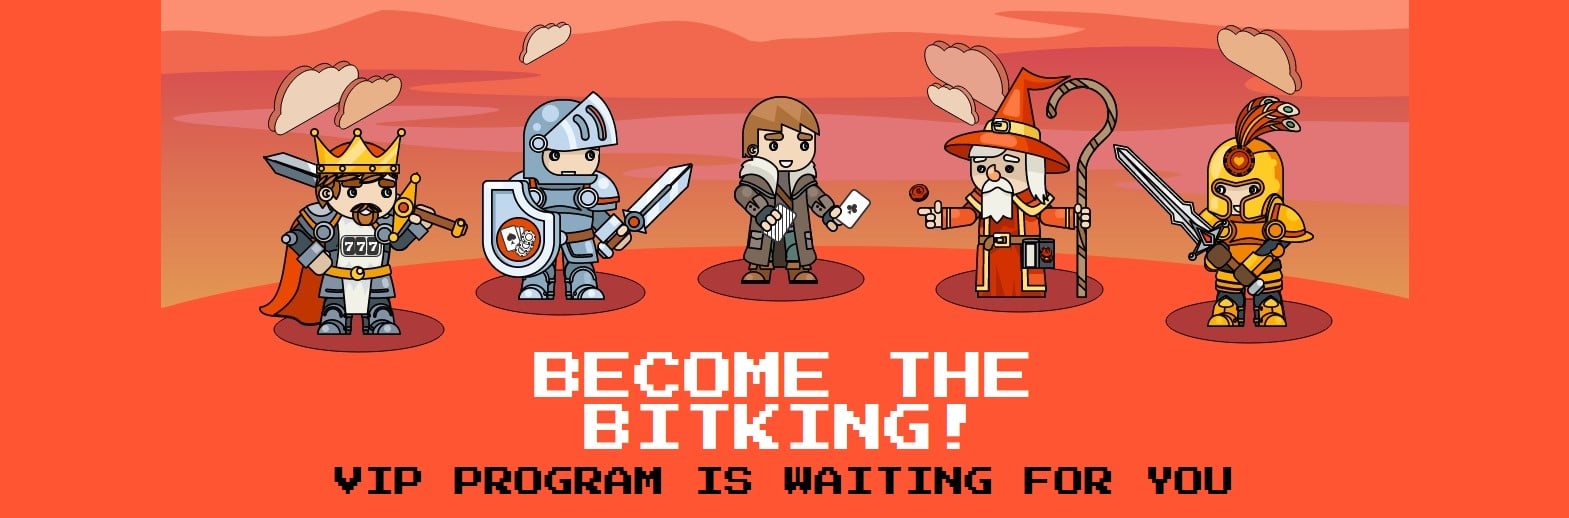 Become The Bitking